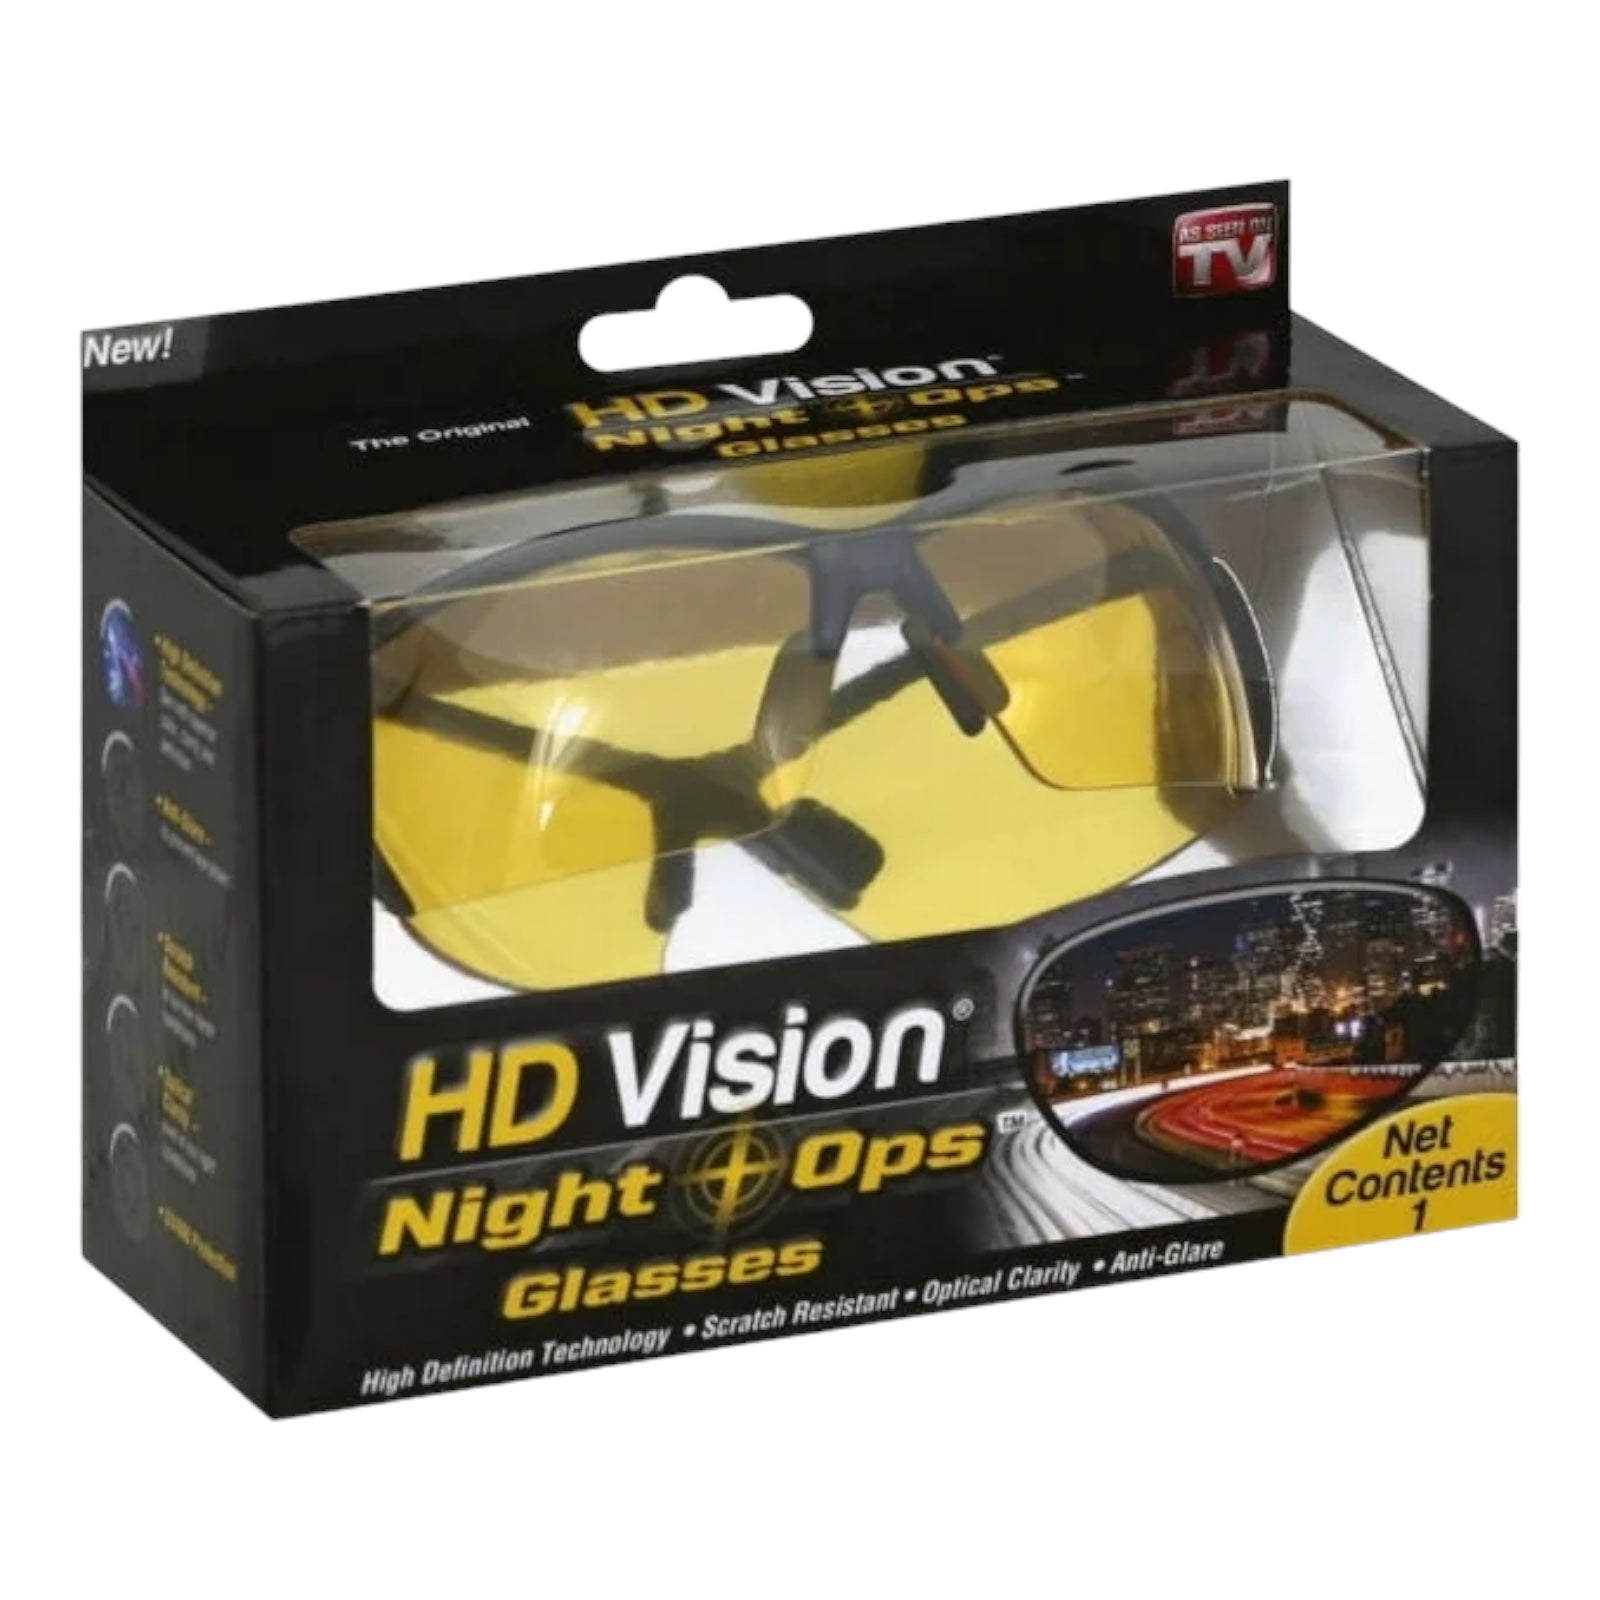 Night Ops HD Vision Sunglasses - Black Unisex Adult with Clear Focus Lenses